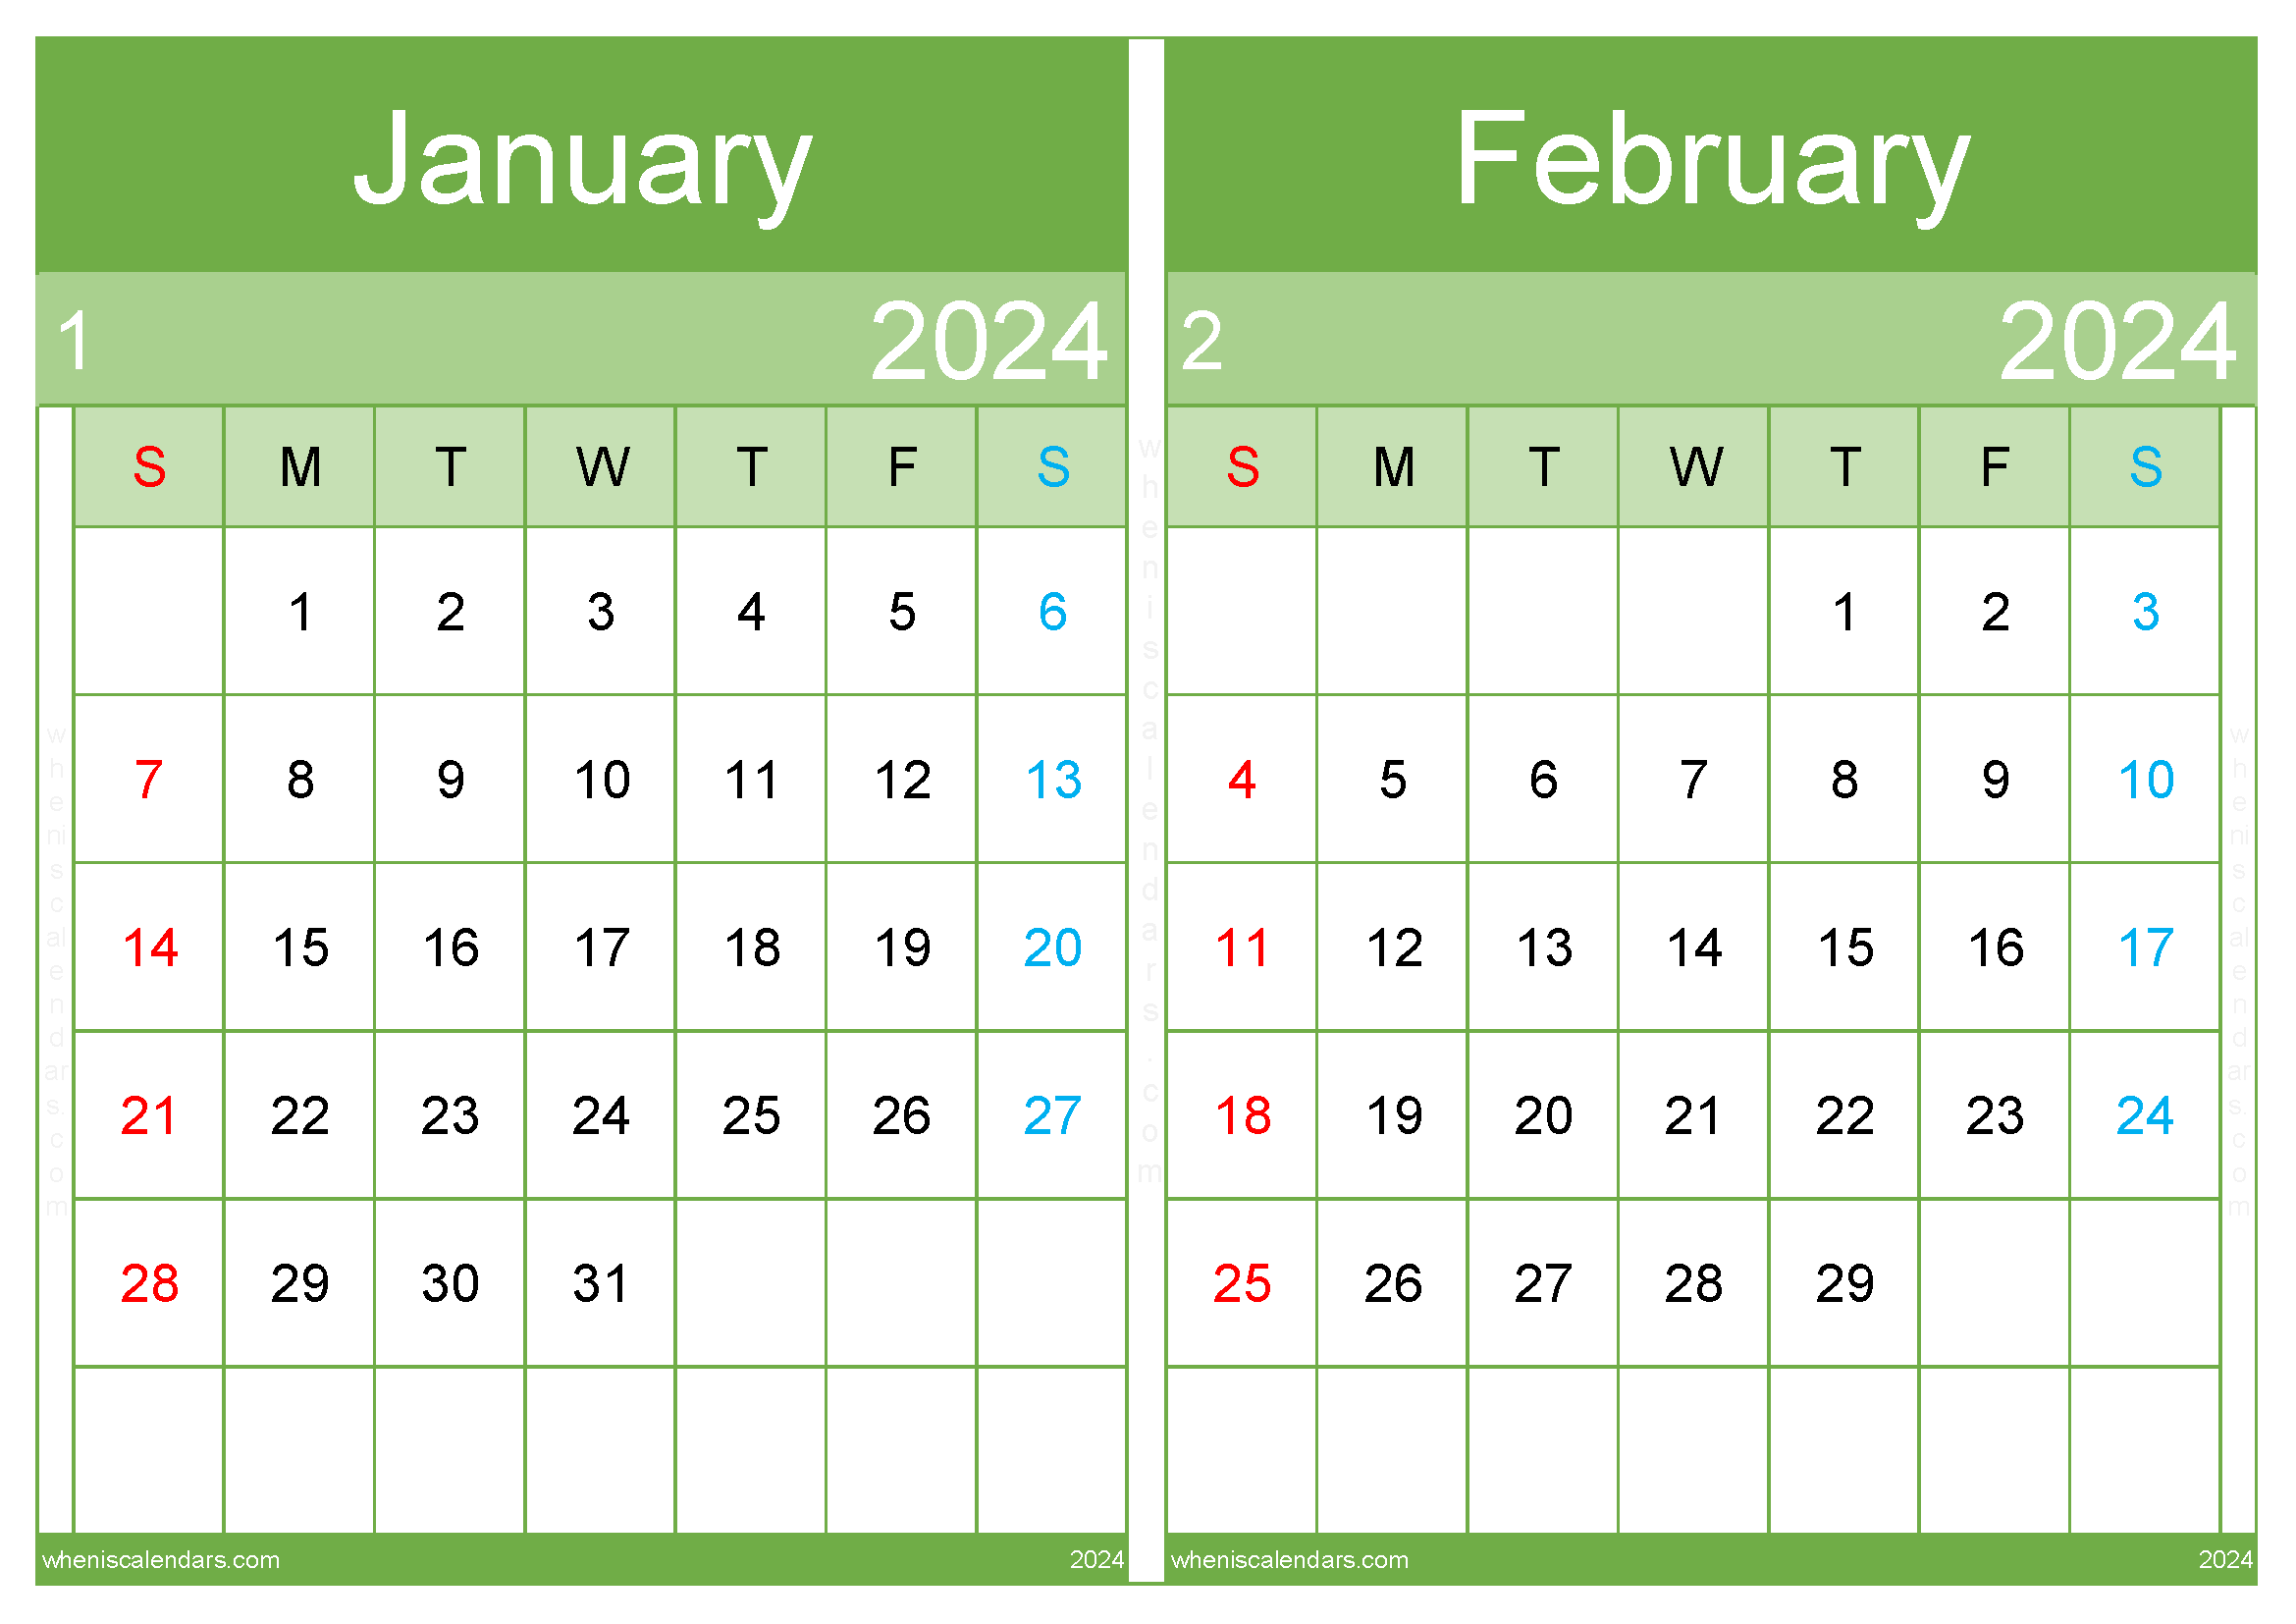 January and February Calendar Two-Month